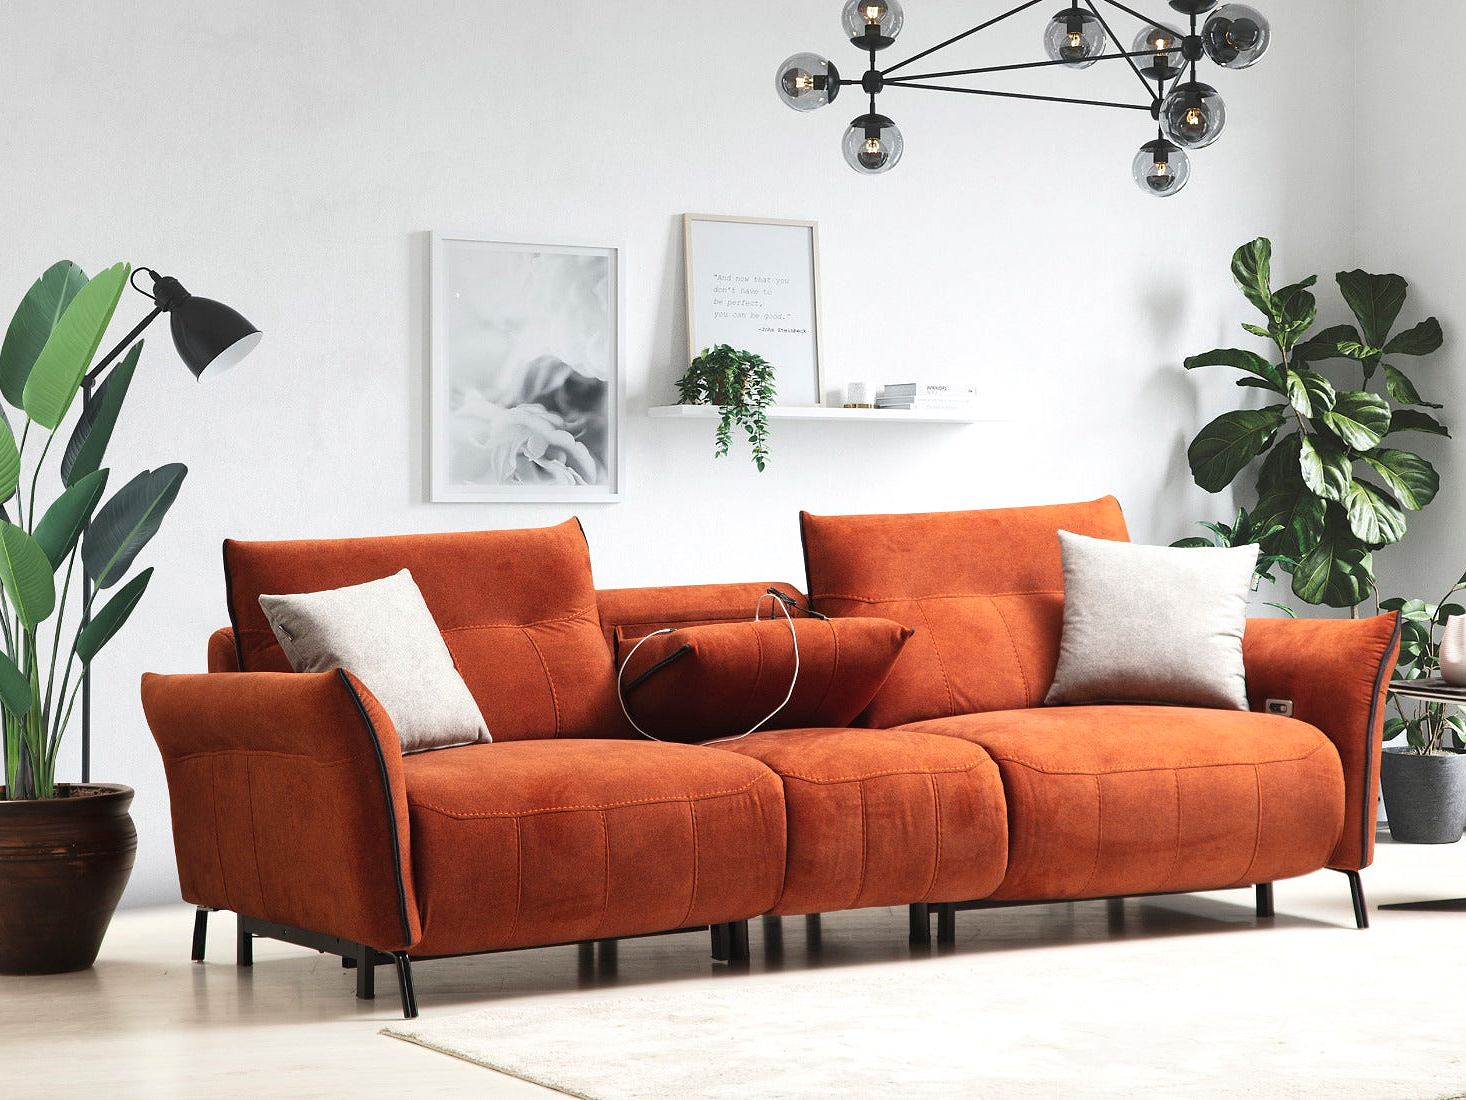 a living room with an orange couch and potted plants